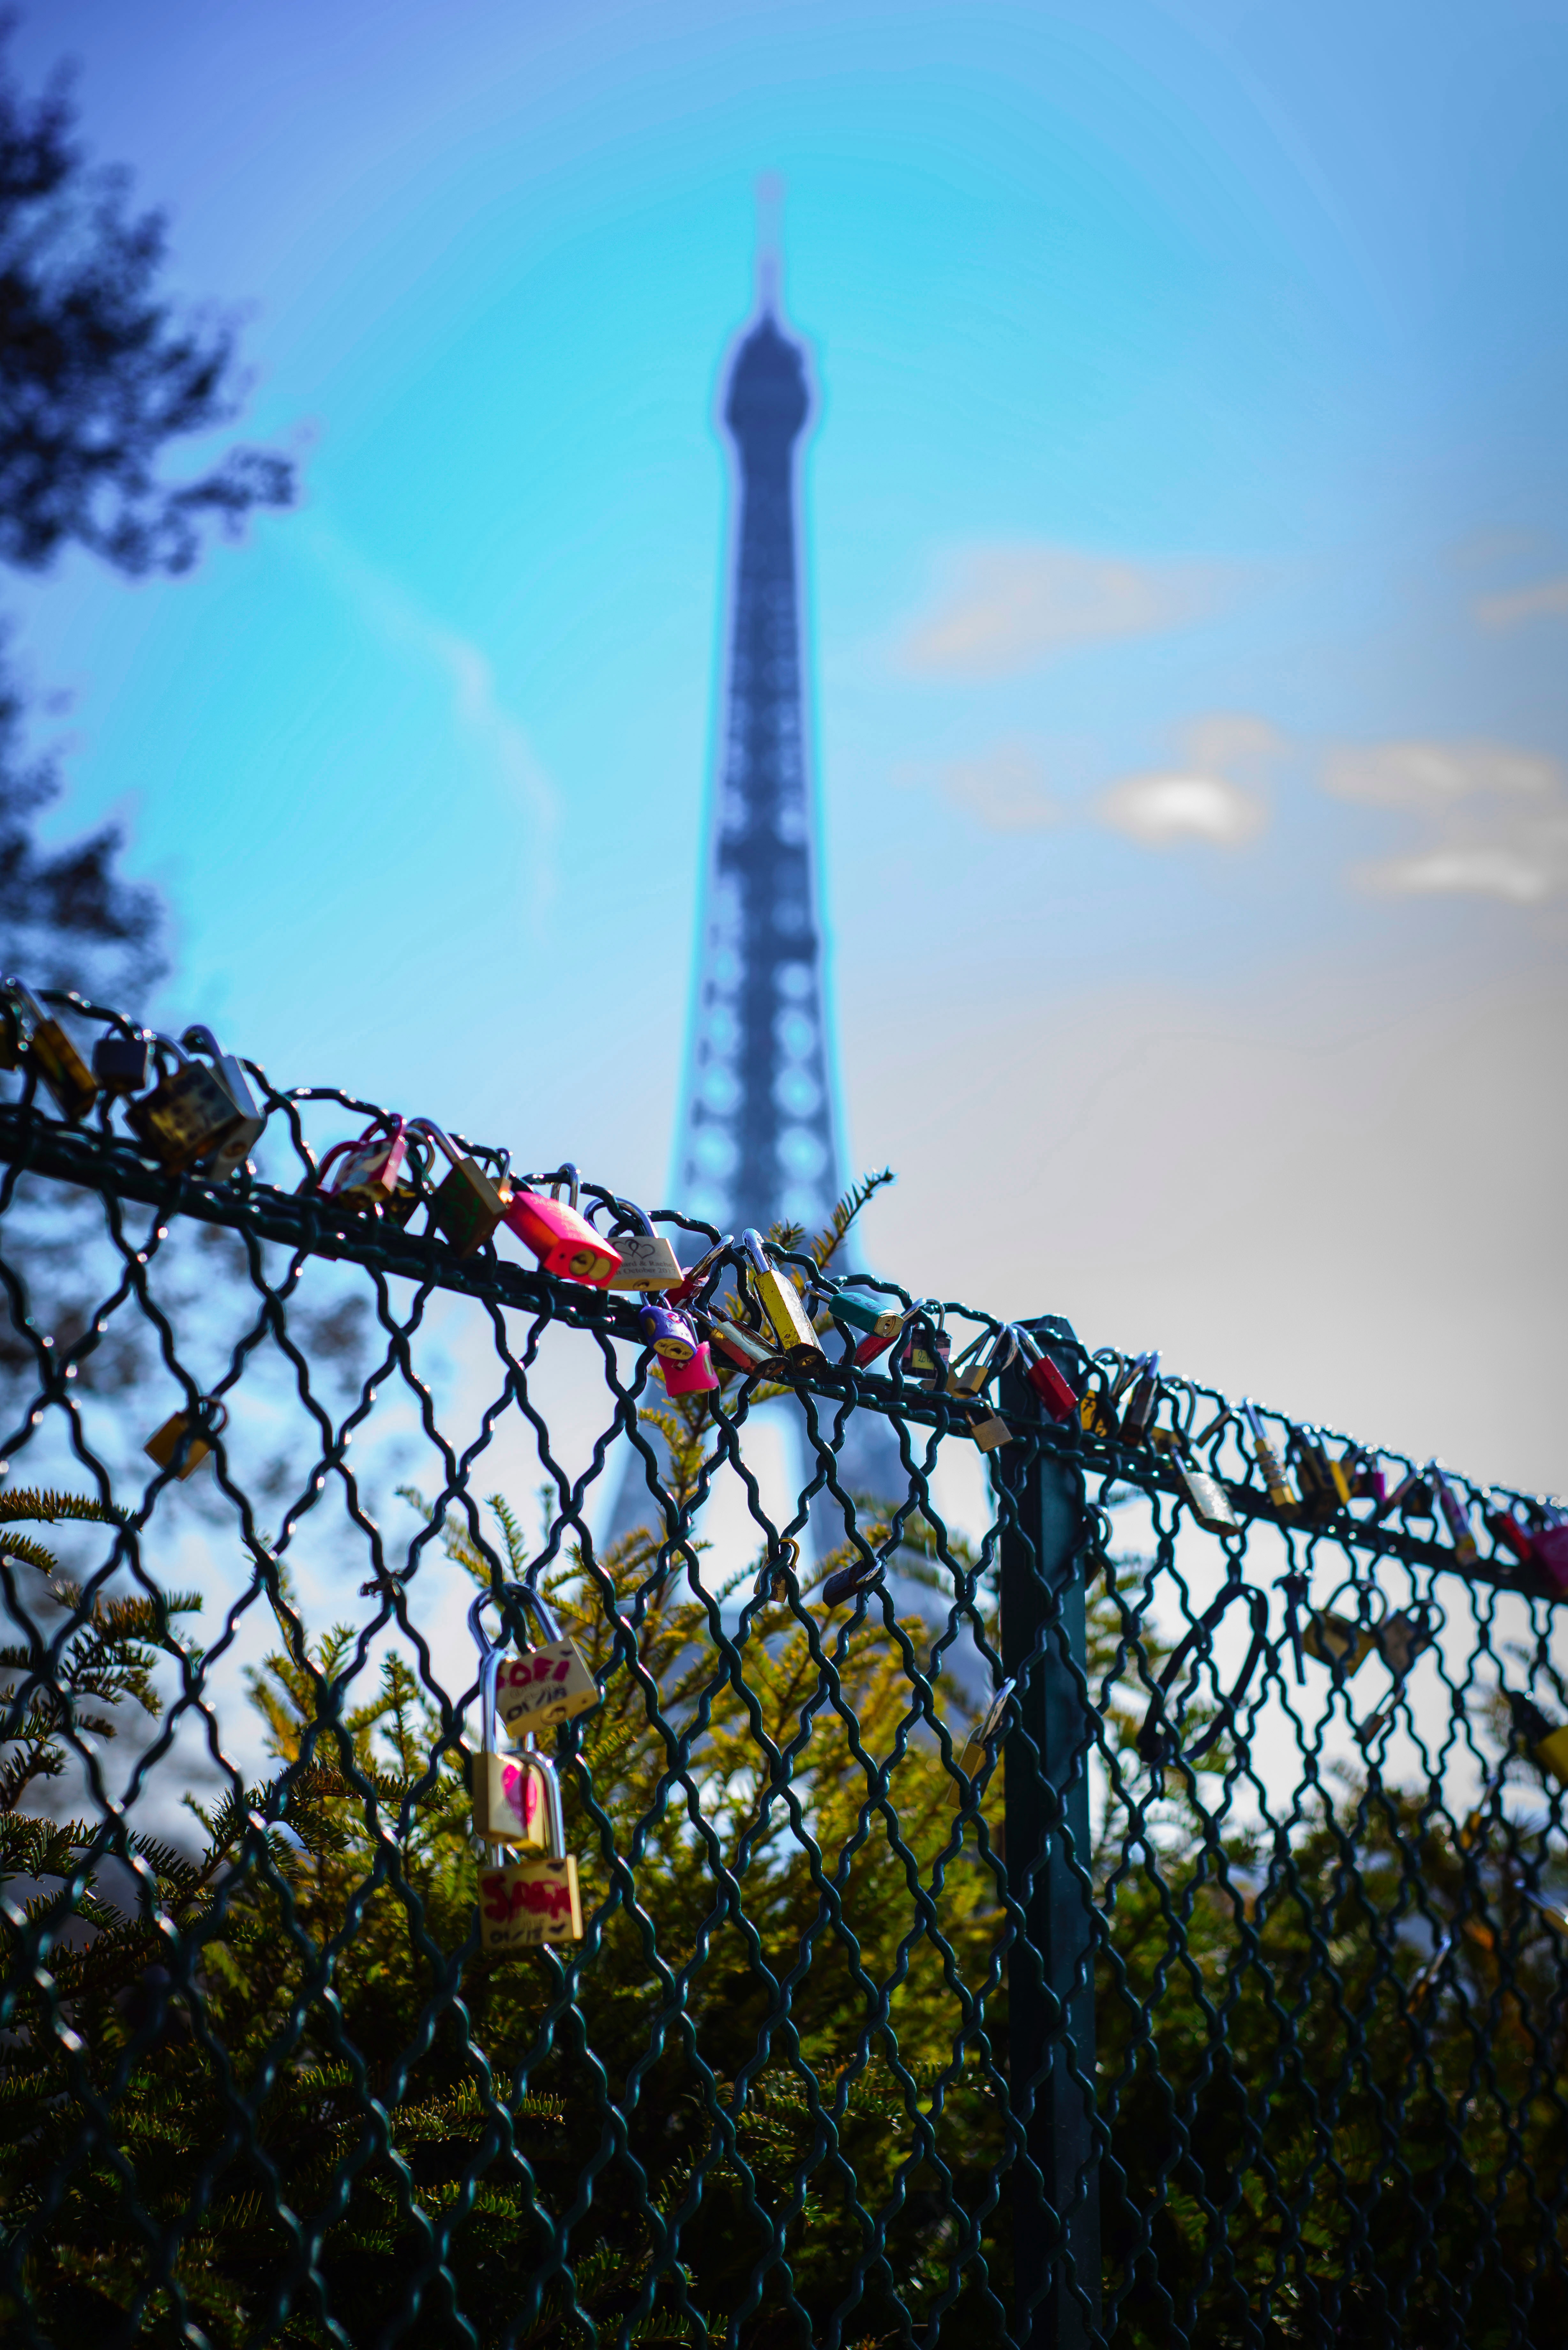 Depth of field photography of love keys on chain link fence in front of eiffel tower